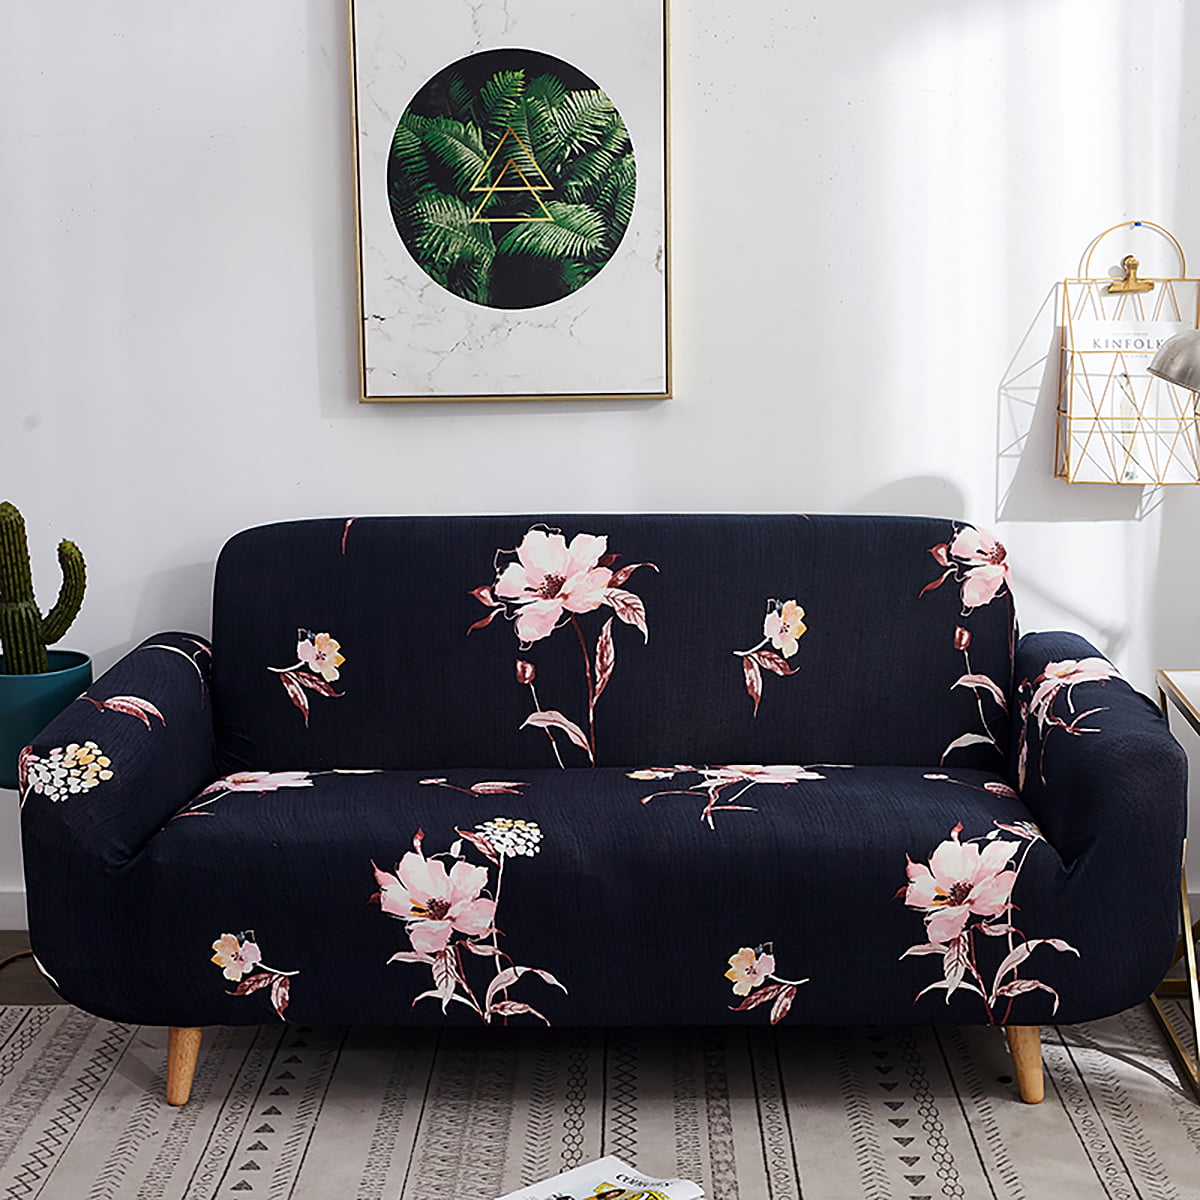 Details about   Floral Sofa Cover Sectional/Corner Slipcover Elastic Stretch Fit Fabric 1-4 Seat 